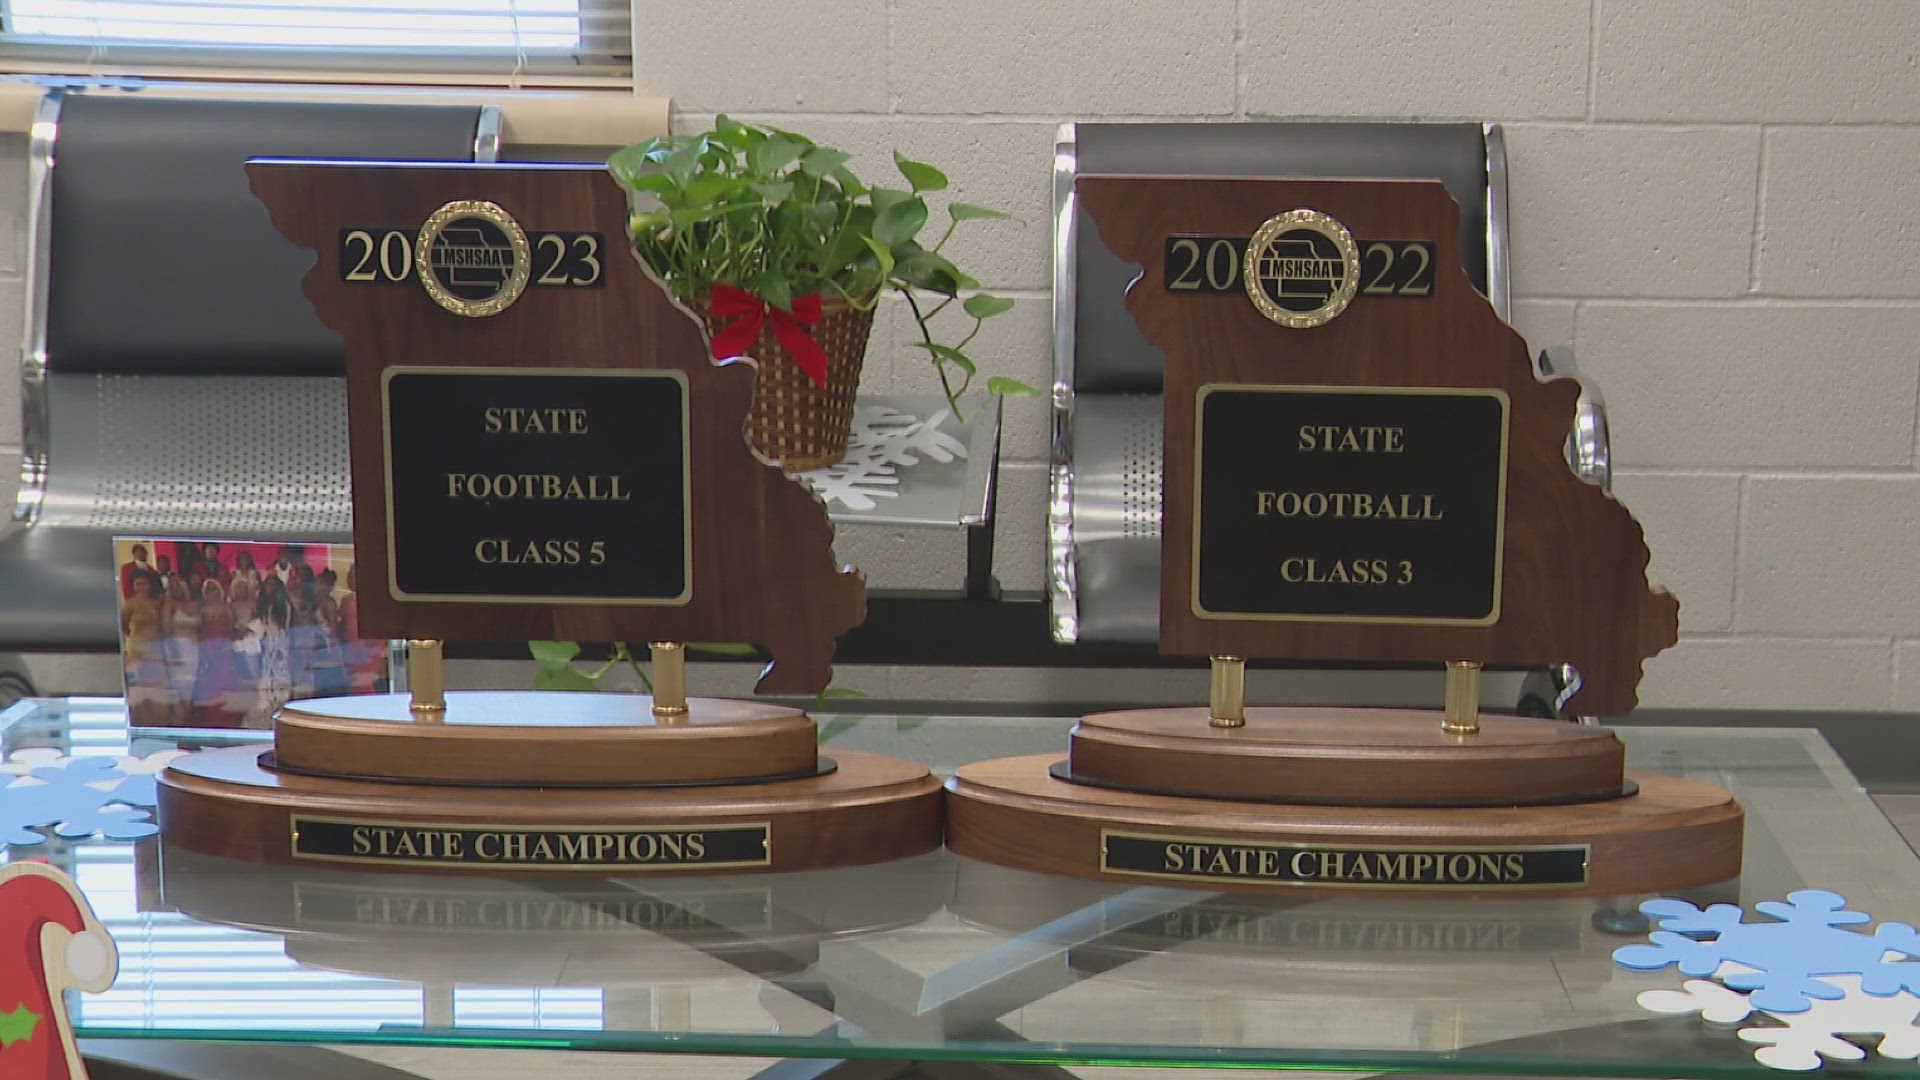 The high school won its second state title in program history and capped off a second straight undefeated season. The team was honored today in St. Louis.